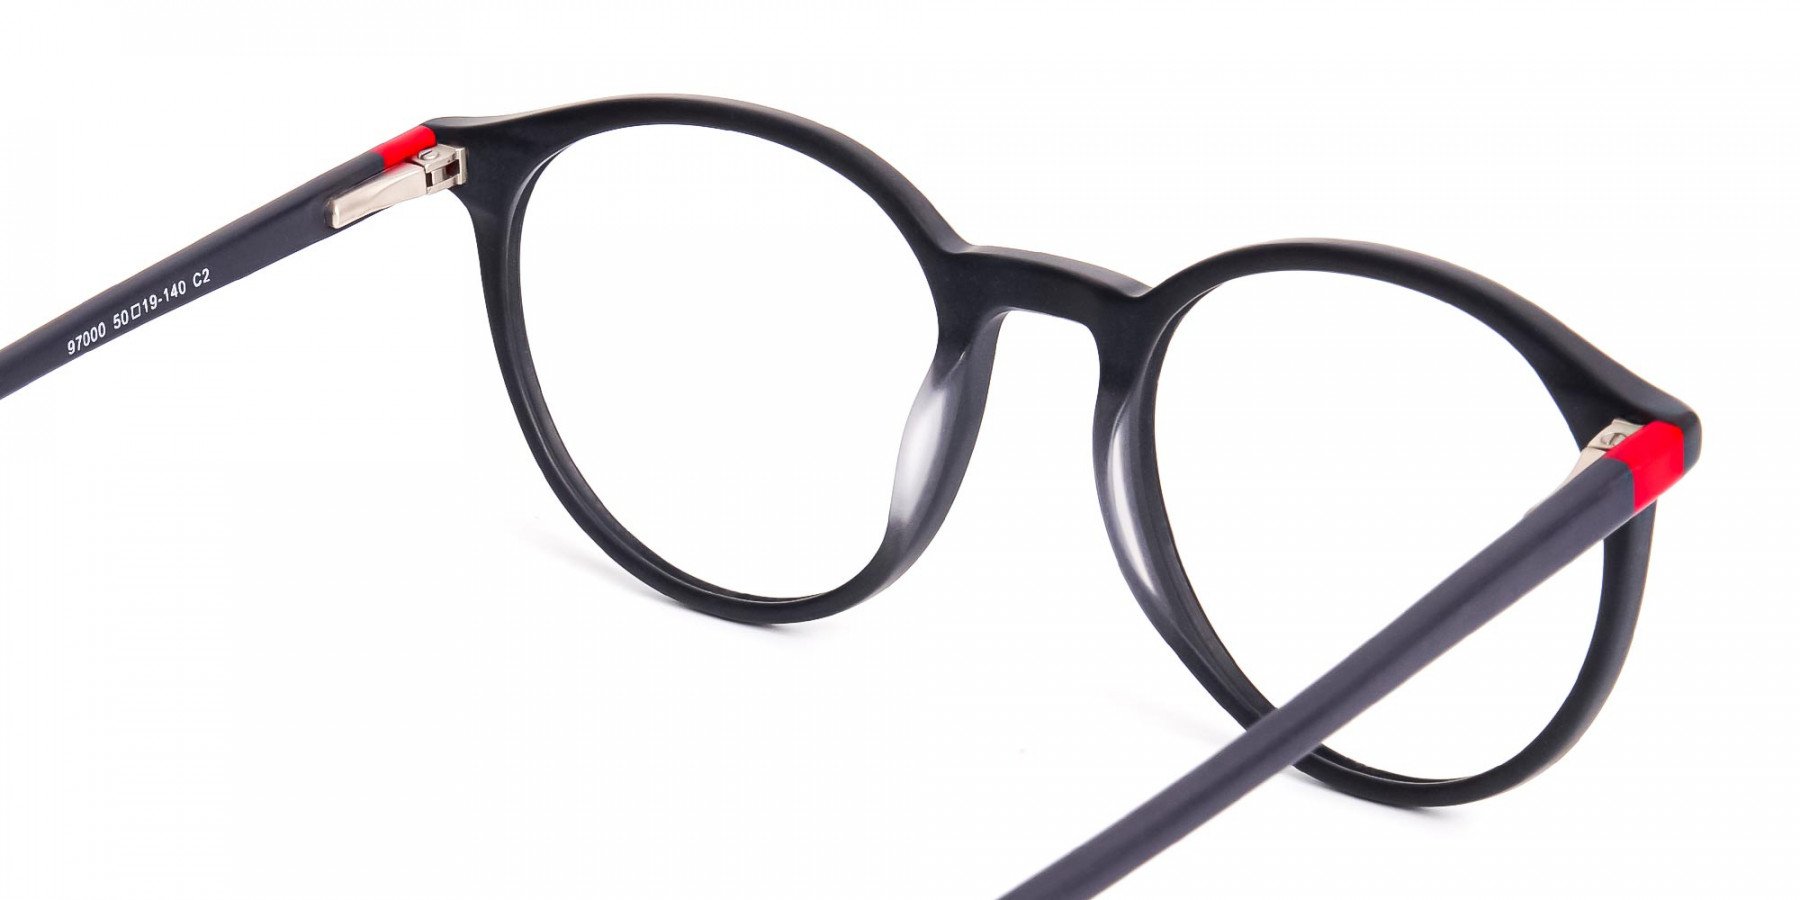 matte-black-and-red-round-glasses-frames-1